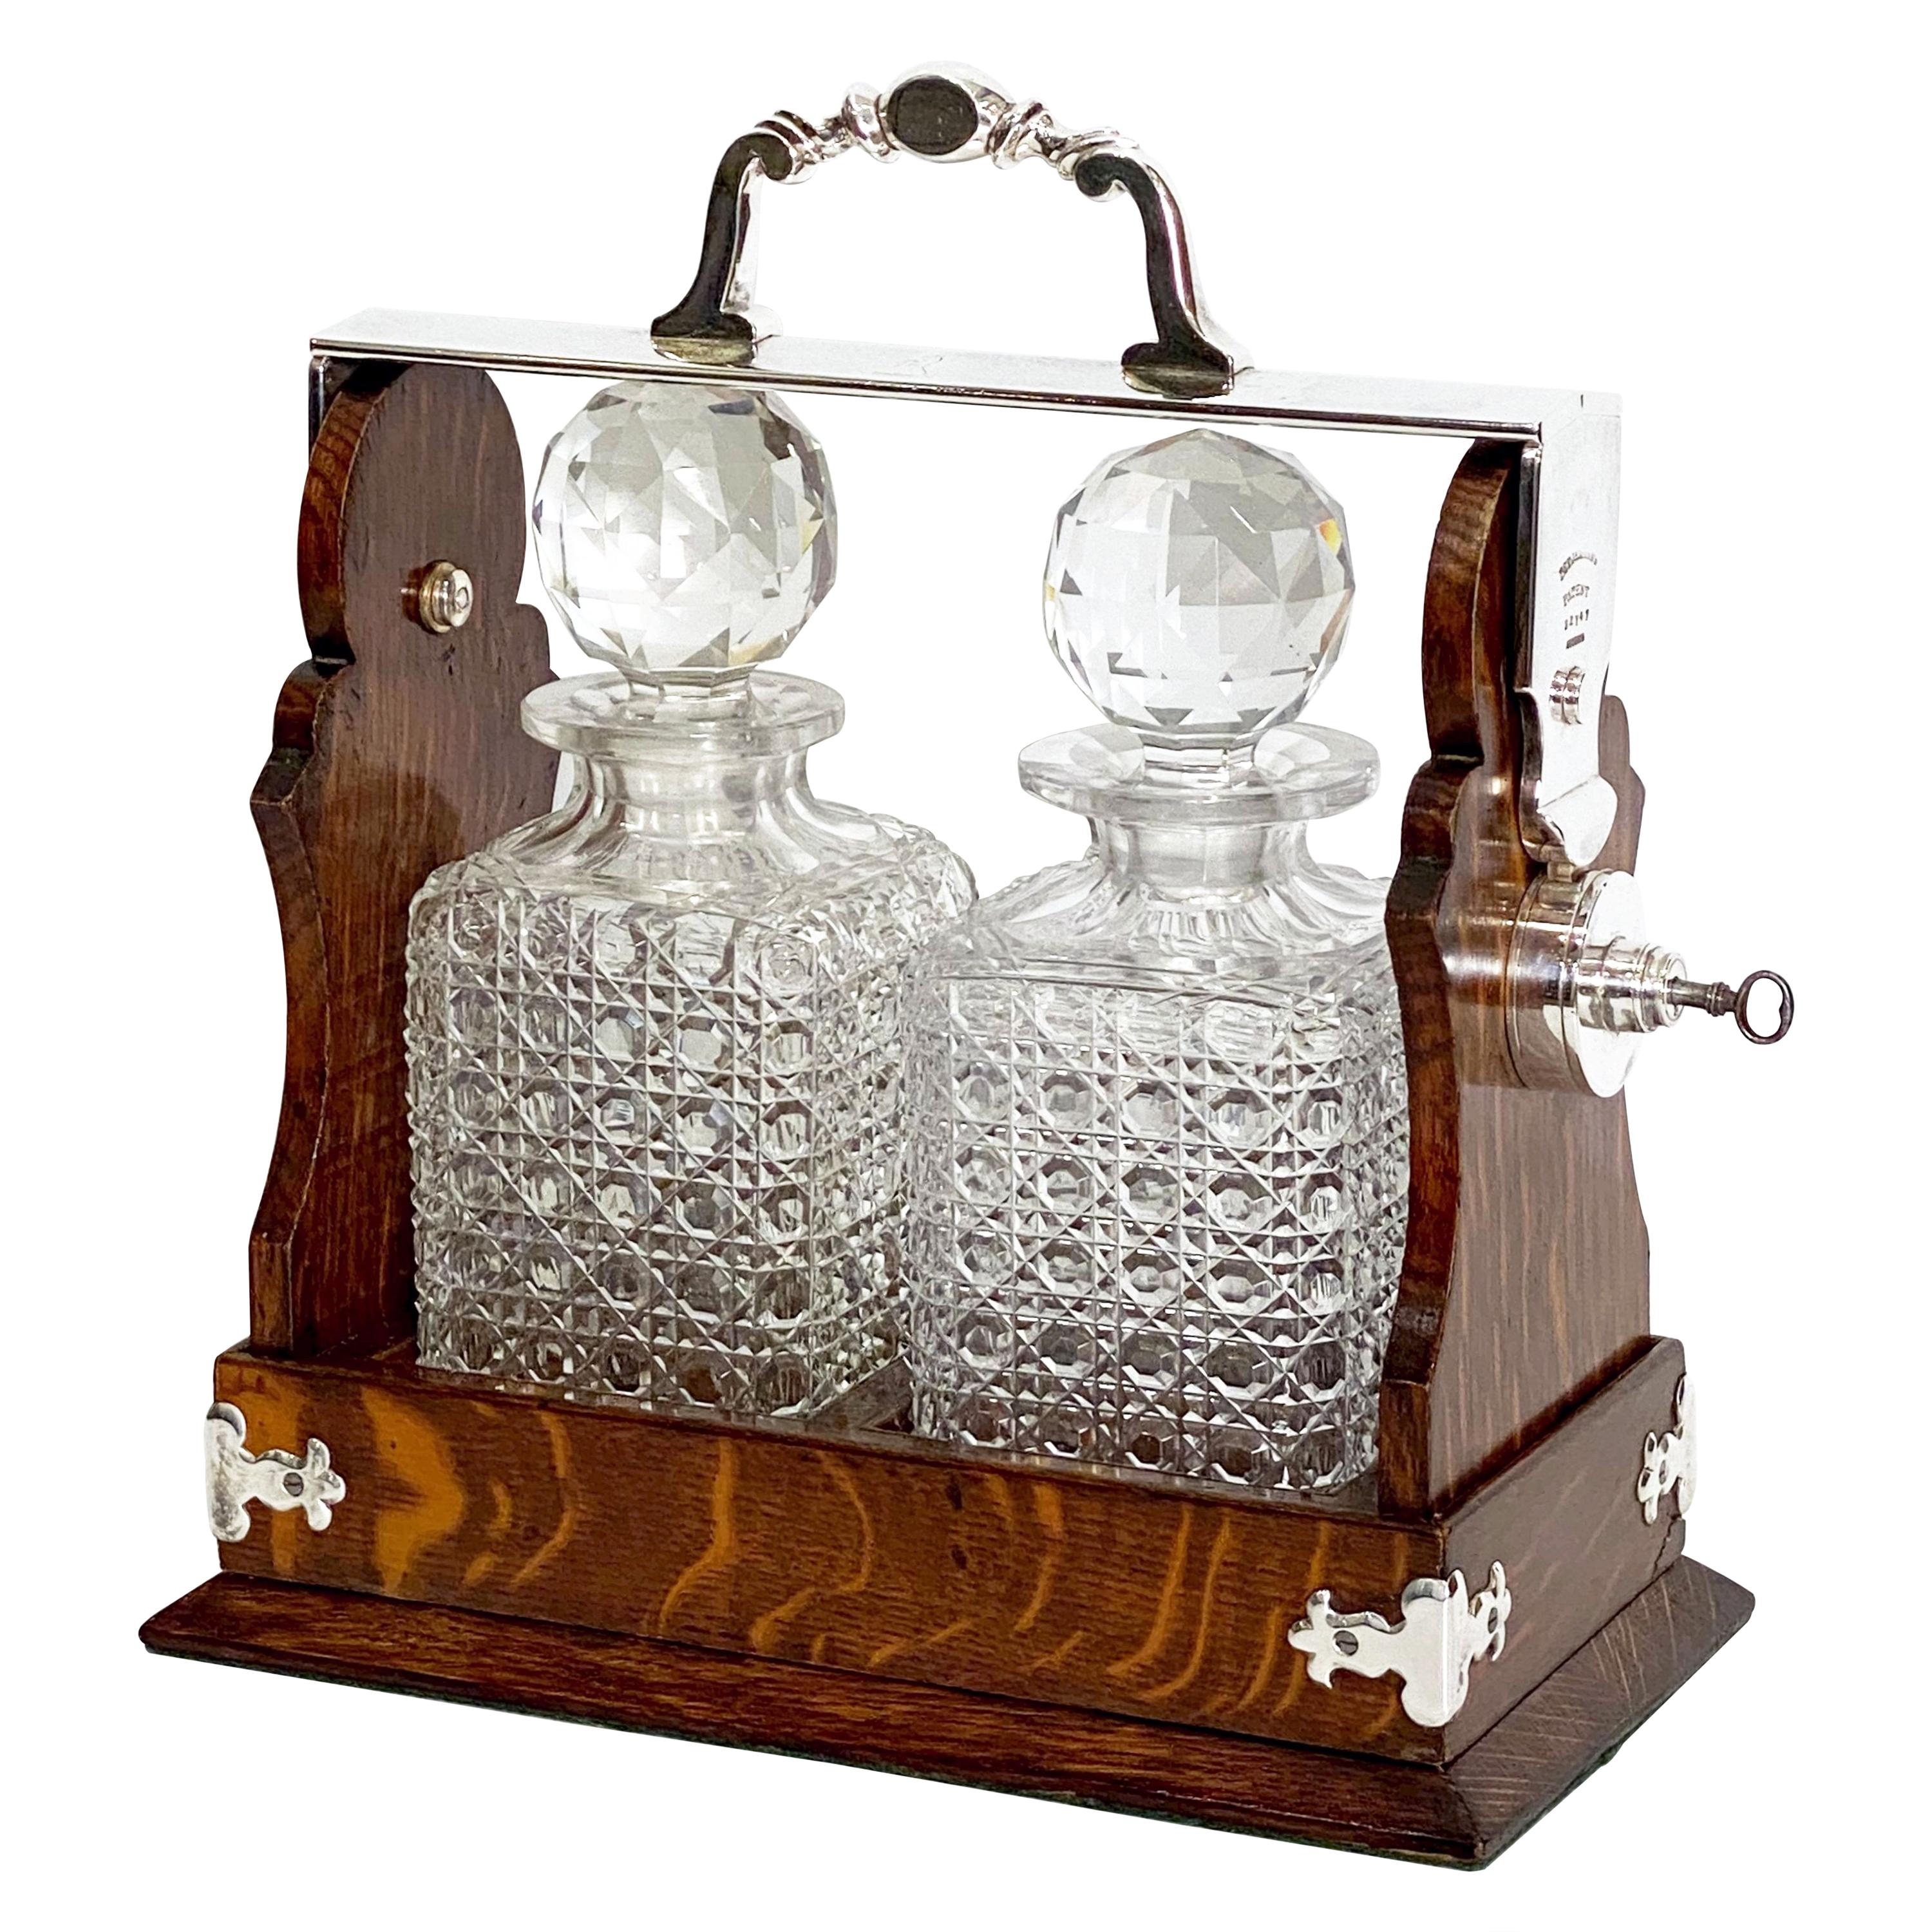 English Oak and Silver Tantalus or Decanter Drinks Set by Betjemann's